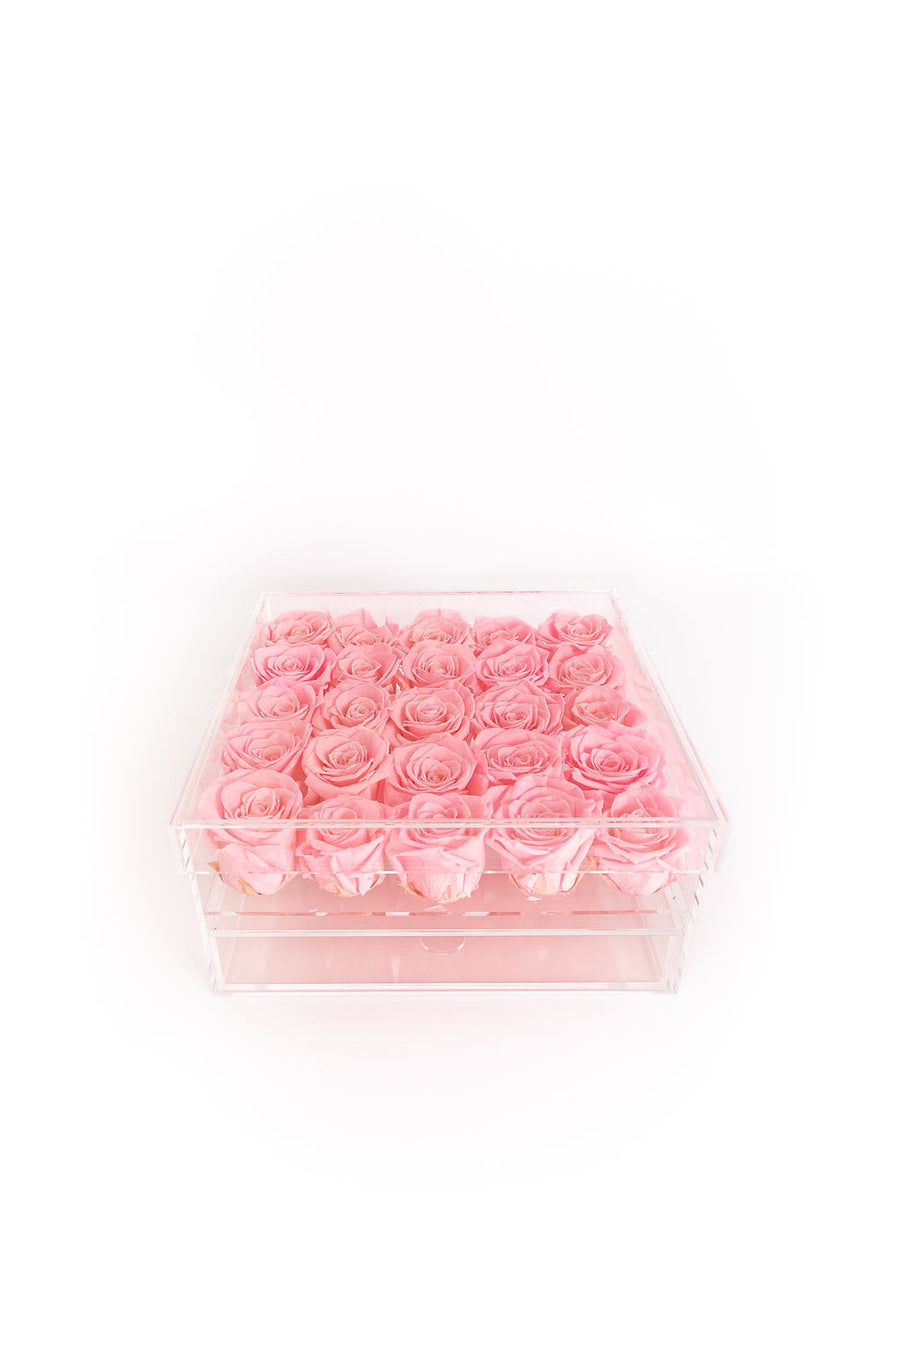 PINK 25 PRESERVED ROSES